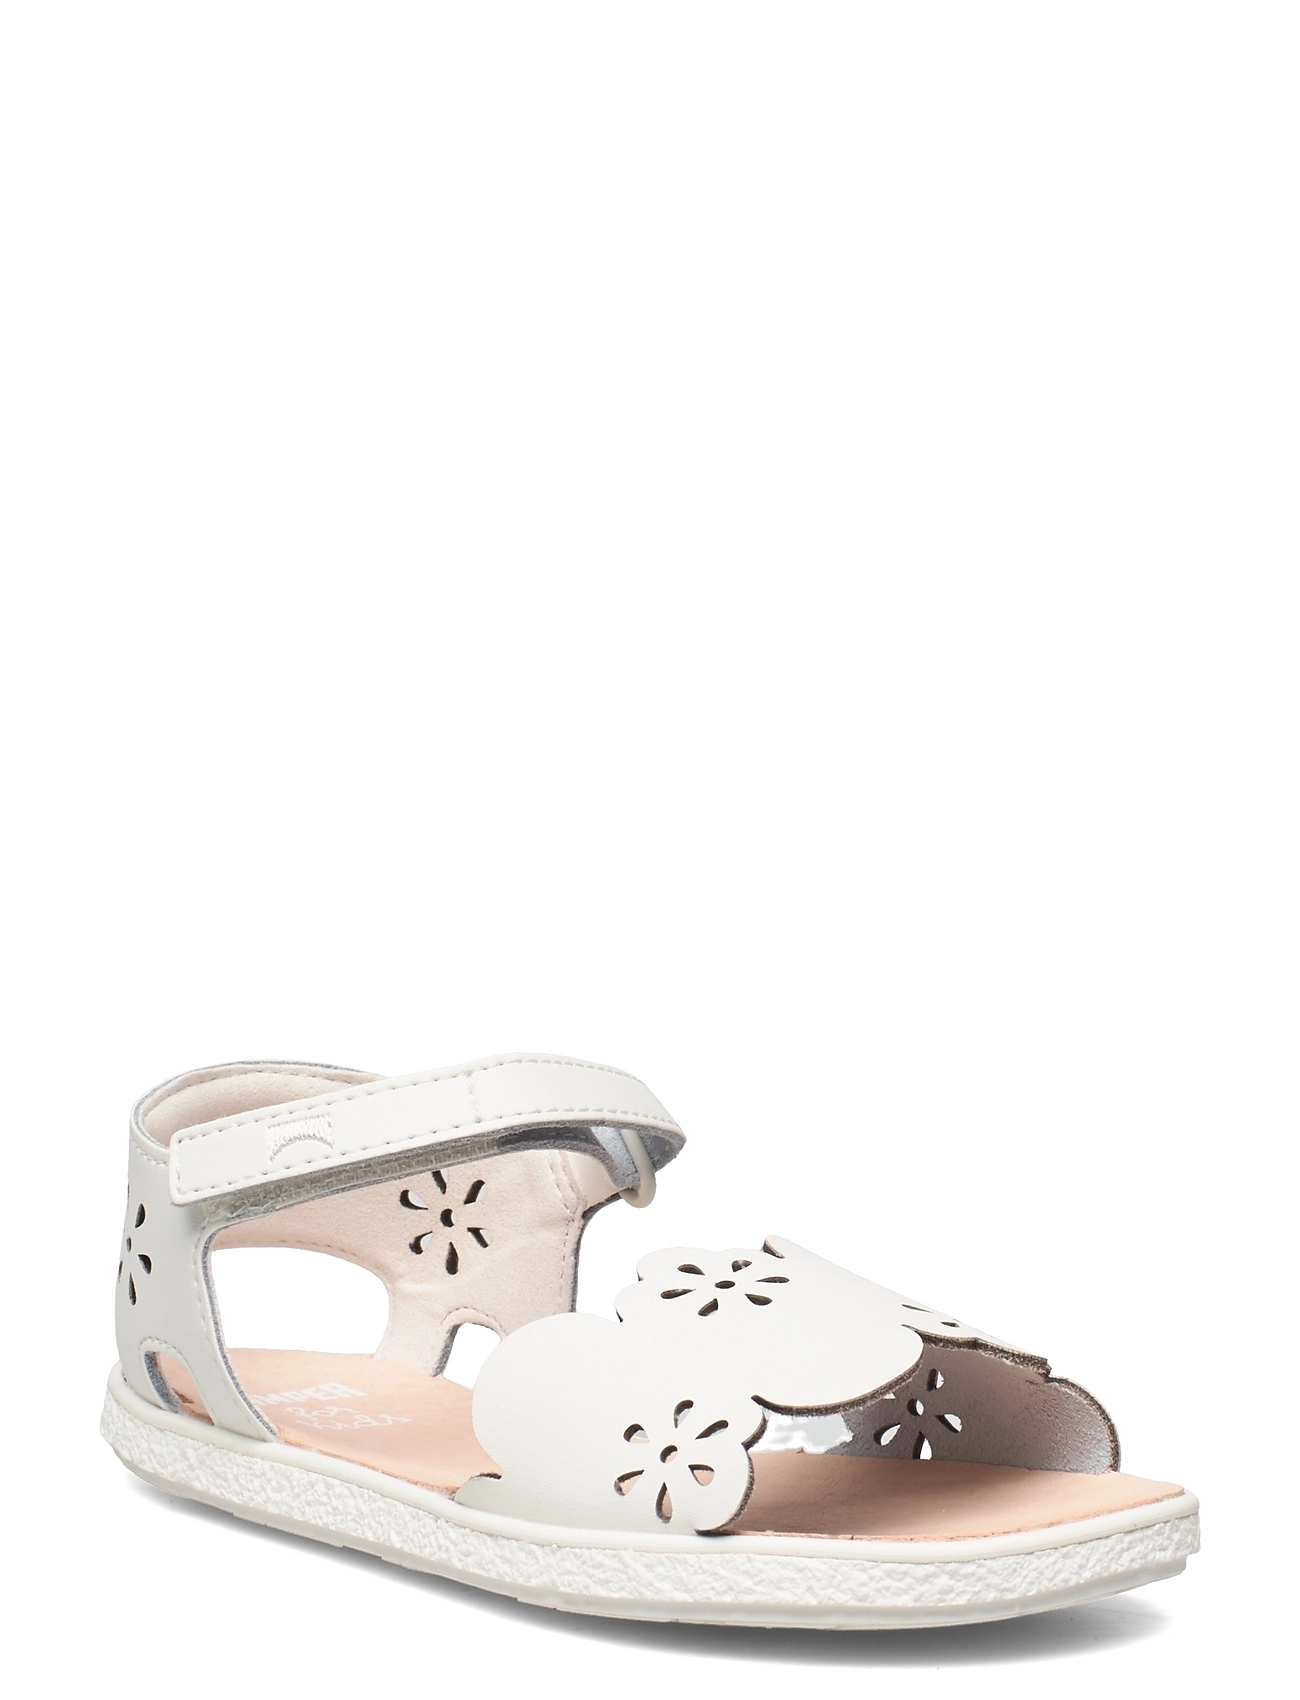 Miko Shoes Summer Shoes Sandals White Camper